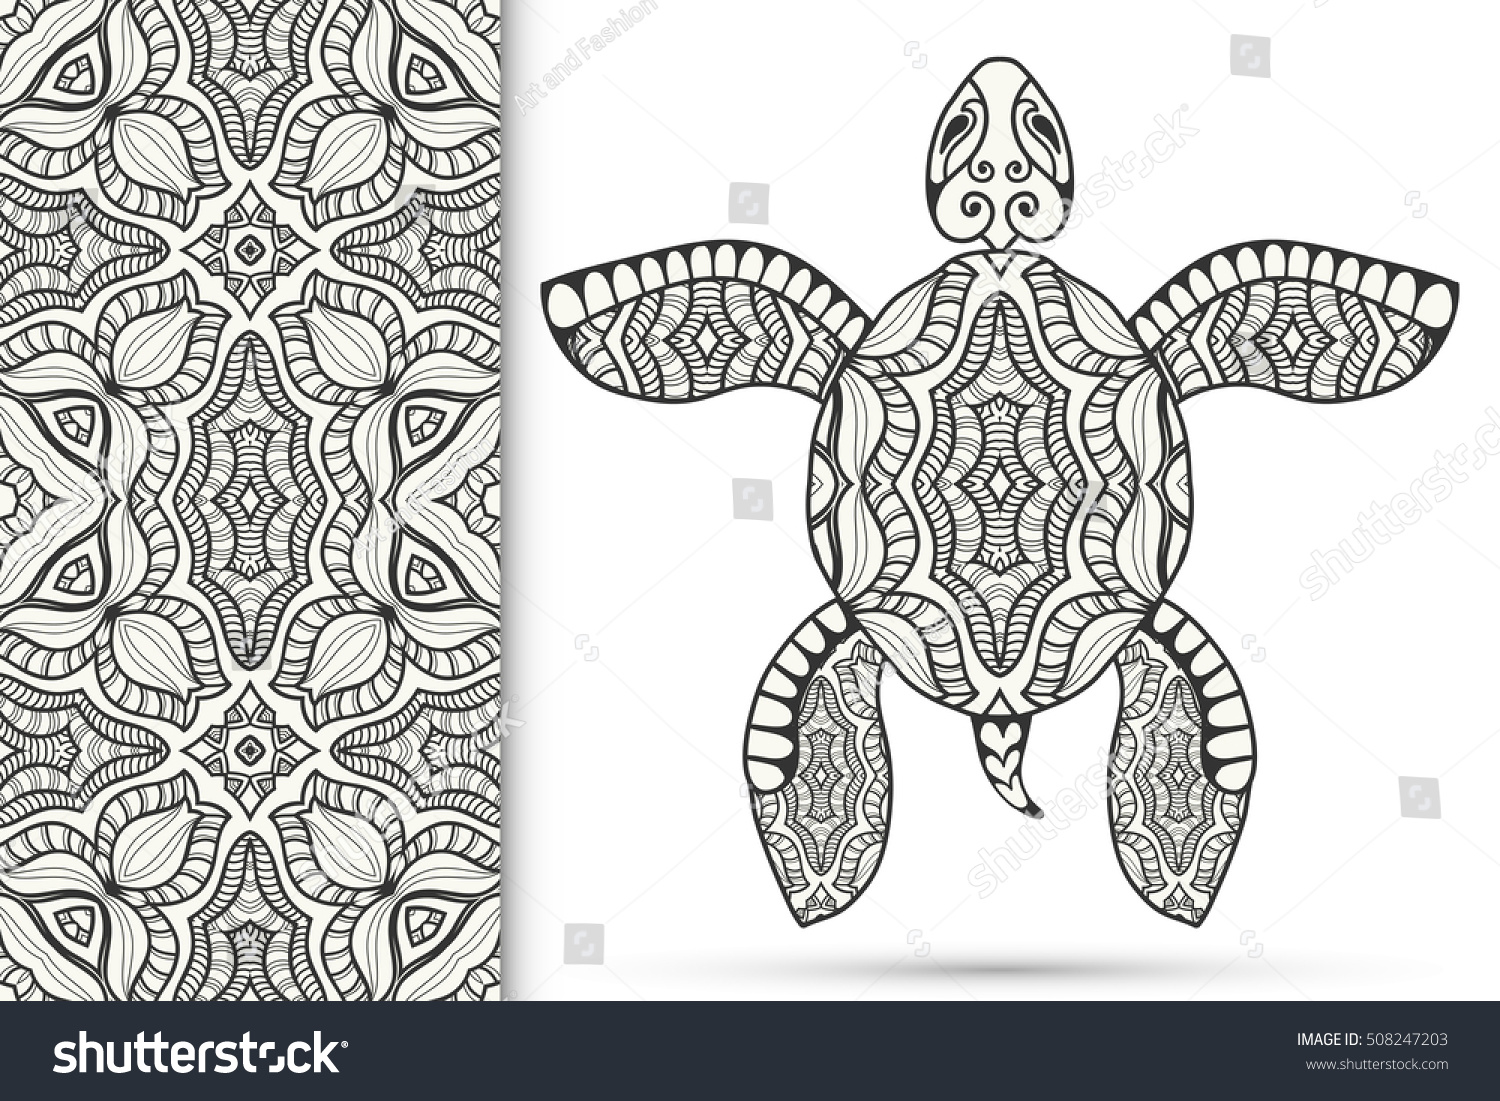 SVG of Decorative turtle with ornament and seamless doodle geometric pattern, vector tribal totem animal, isolated elements for coloring book page, invitation or greeting card design svg